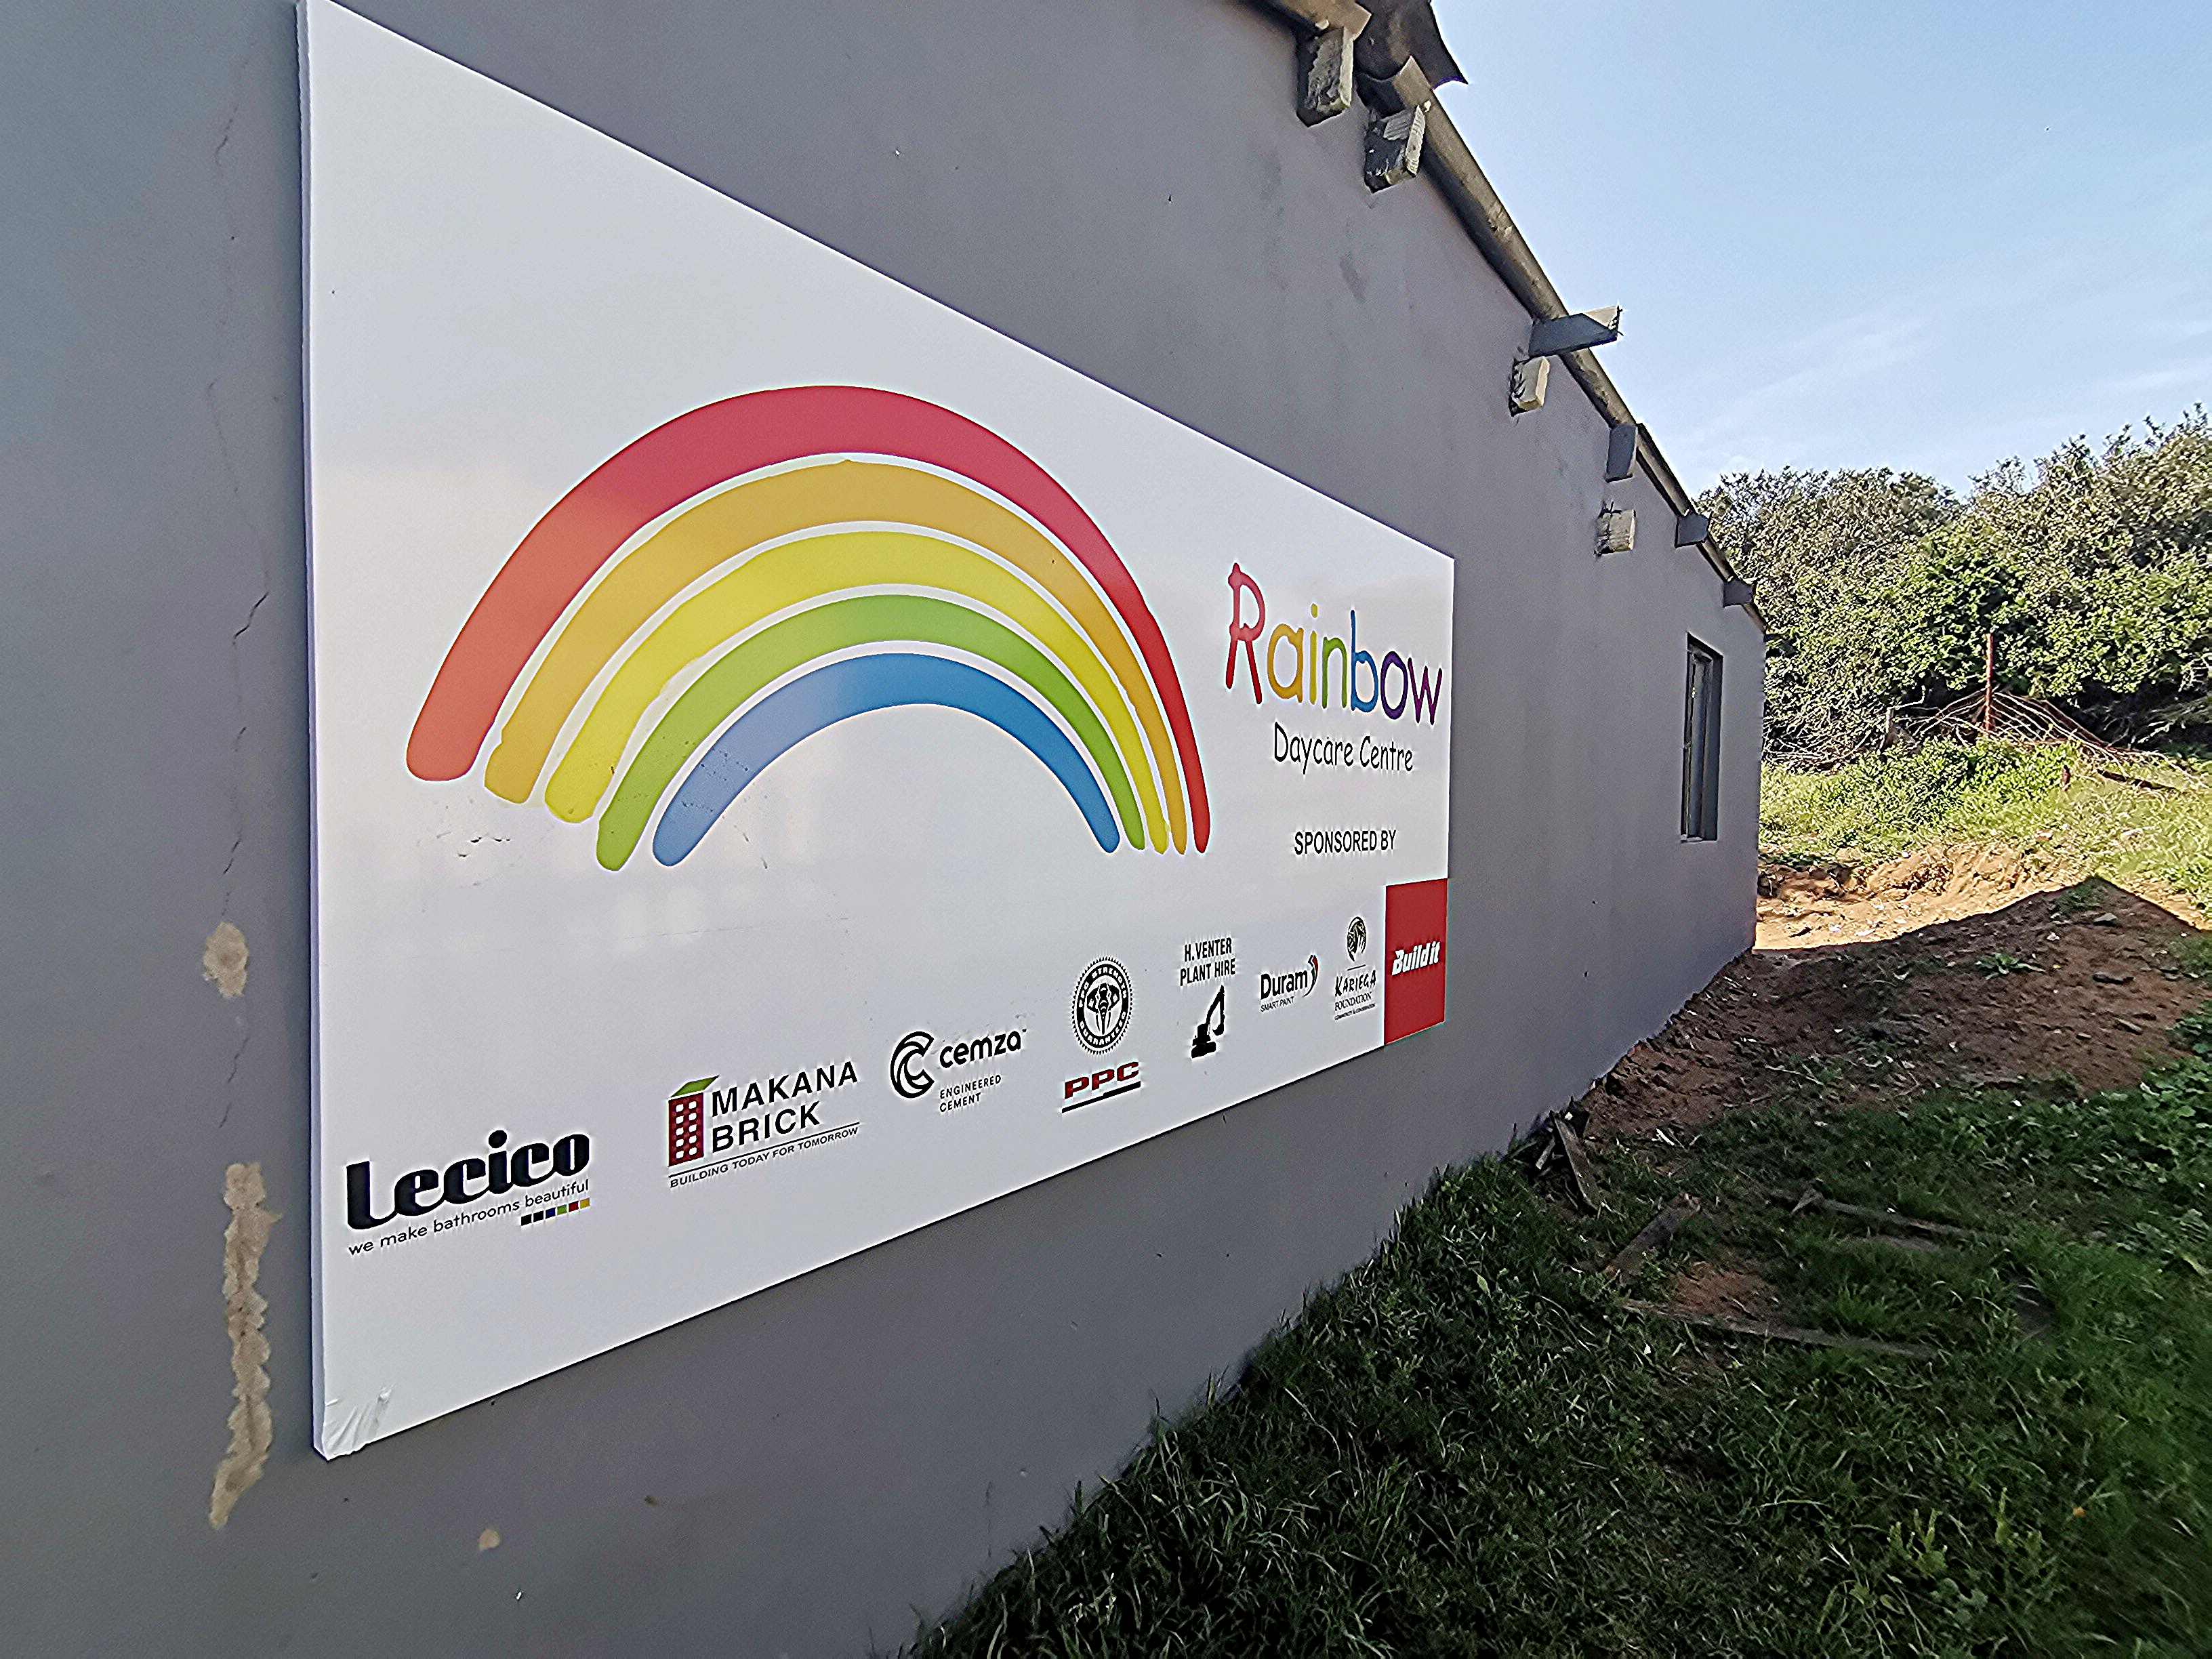 The renovated Rainbow Day Care Centre with it's new sign